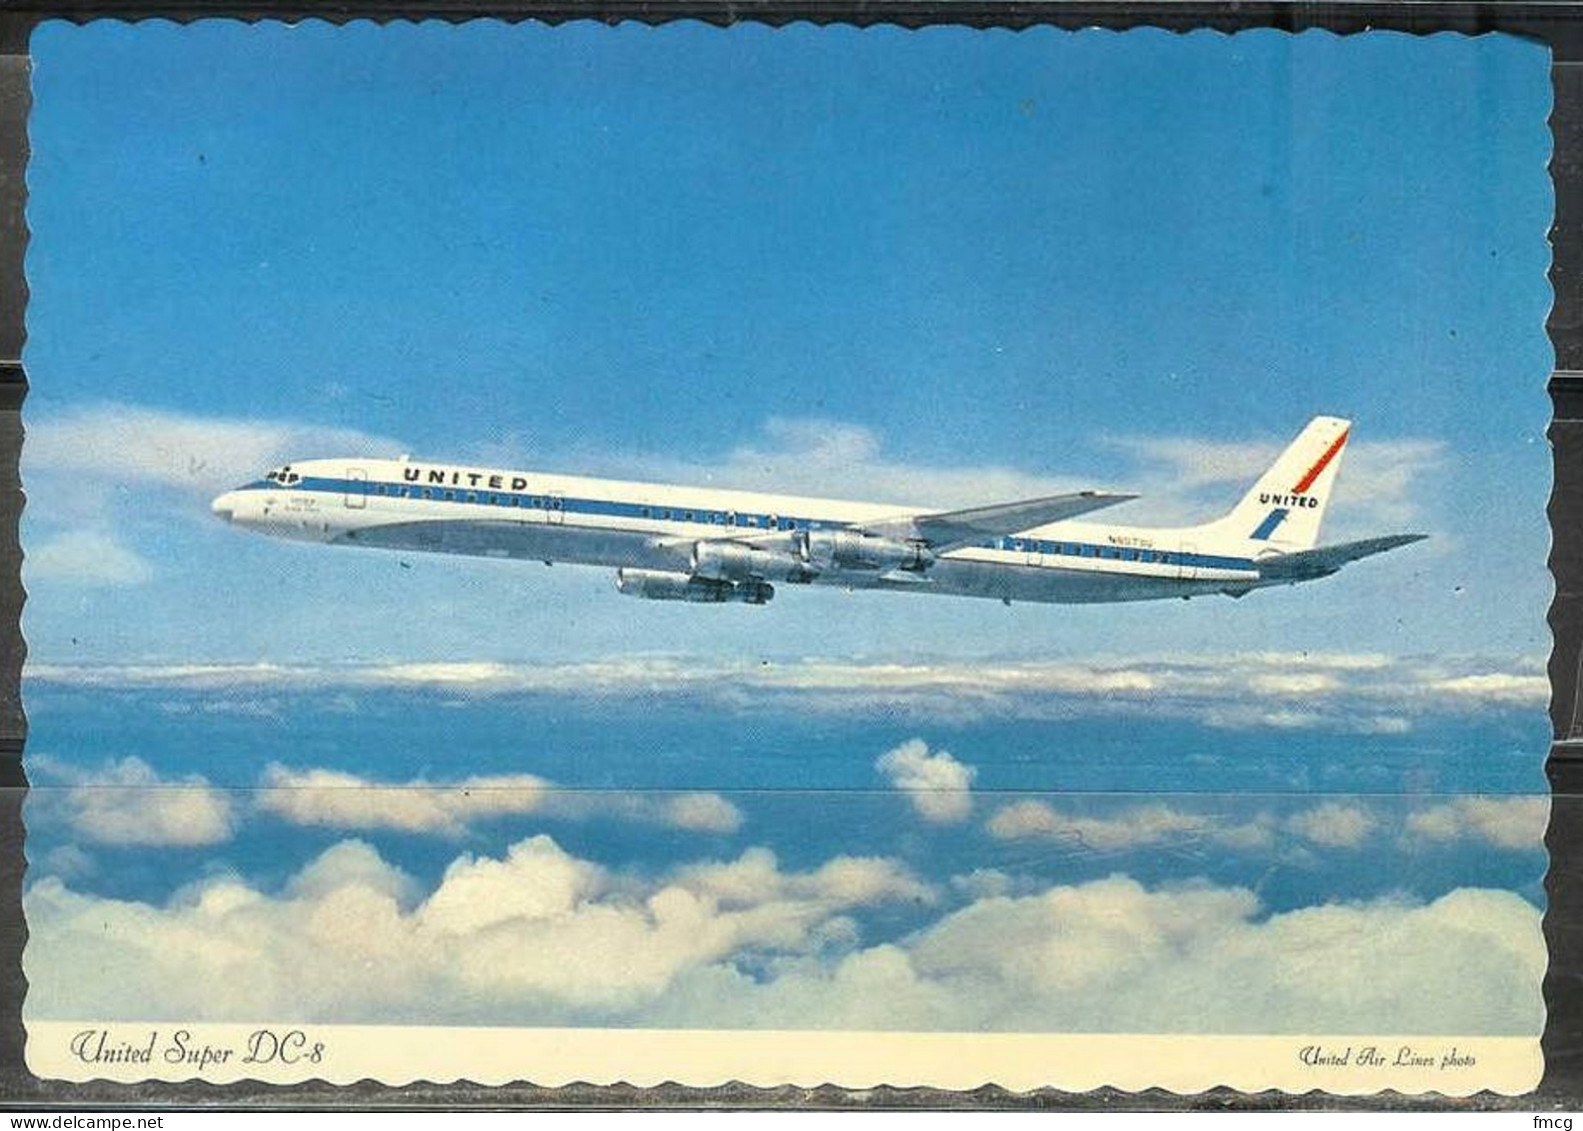 United Airlines DC-8, Unused, From 1970 - 1946-....: Ere Moderne